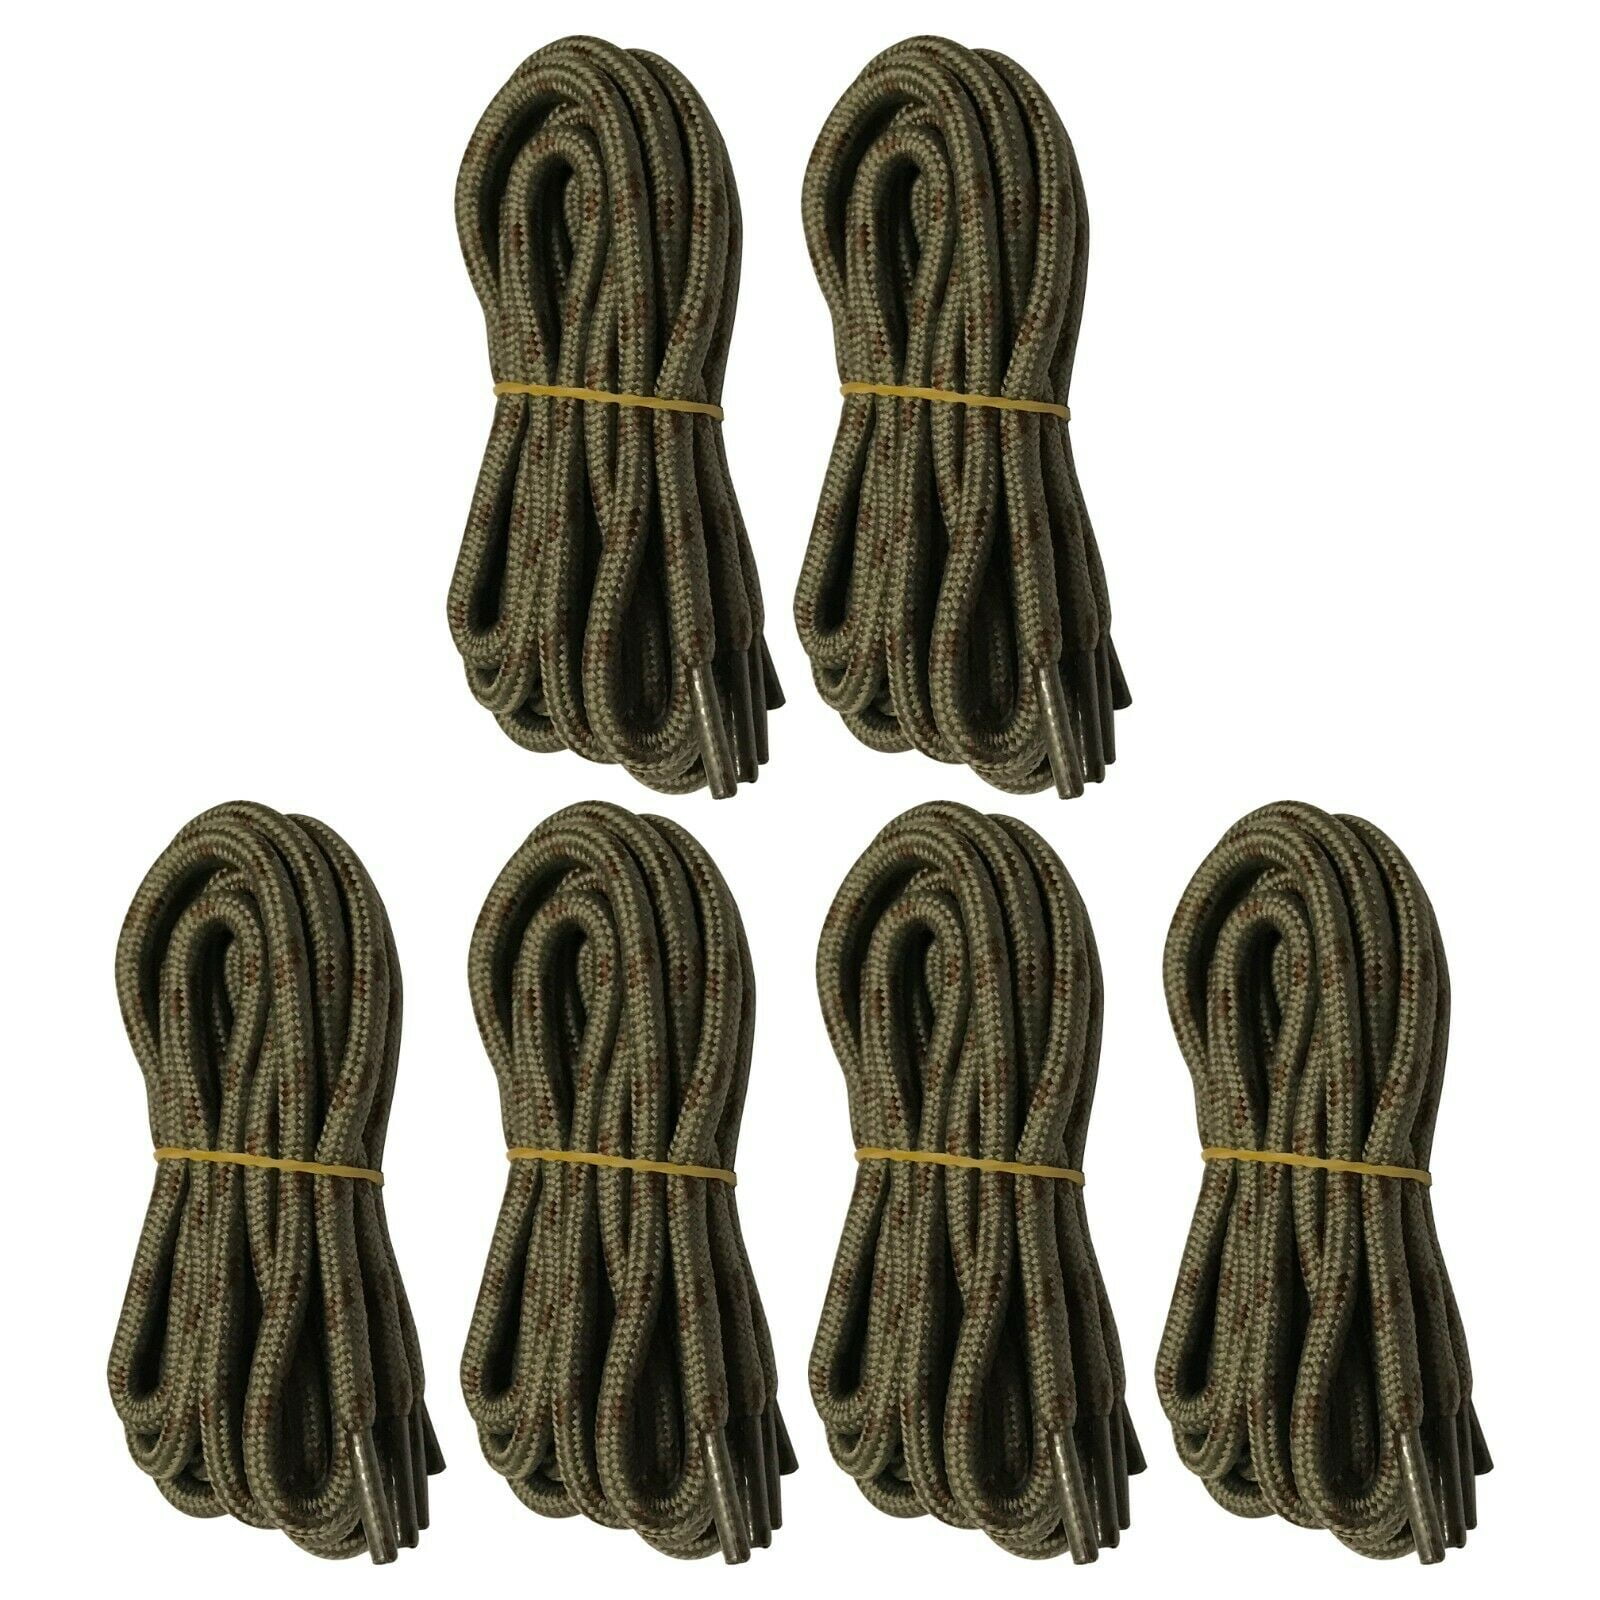 6 boot laces